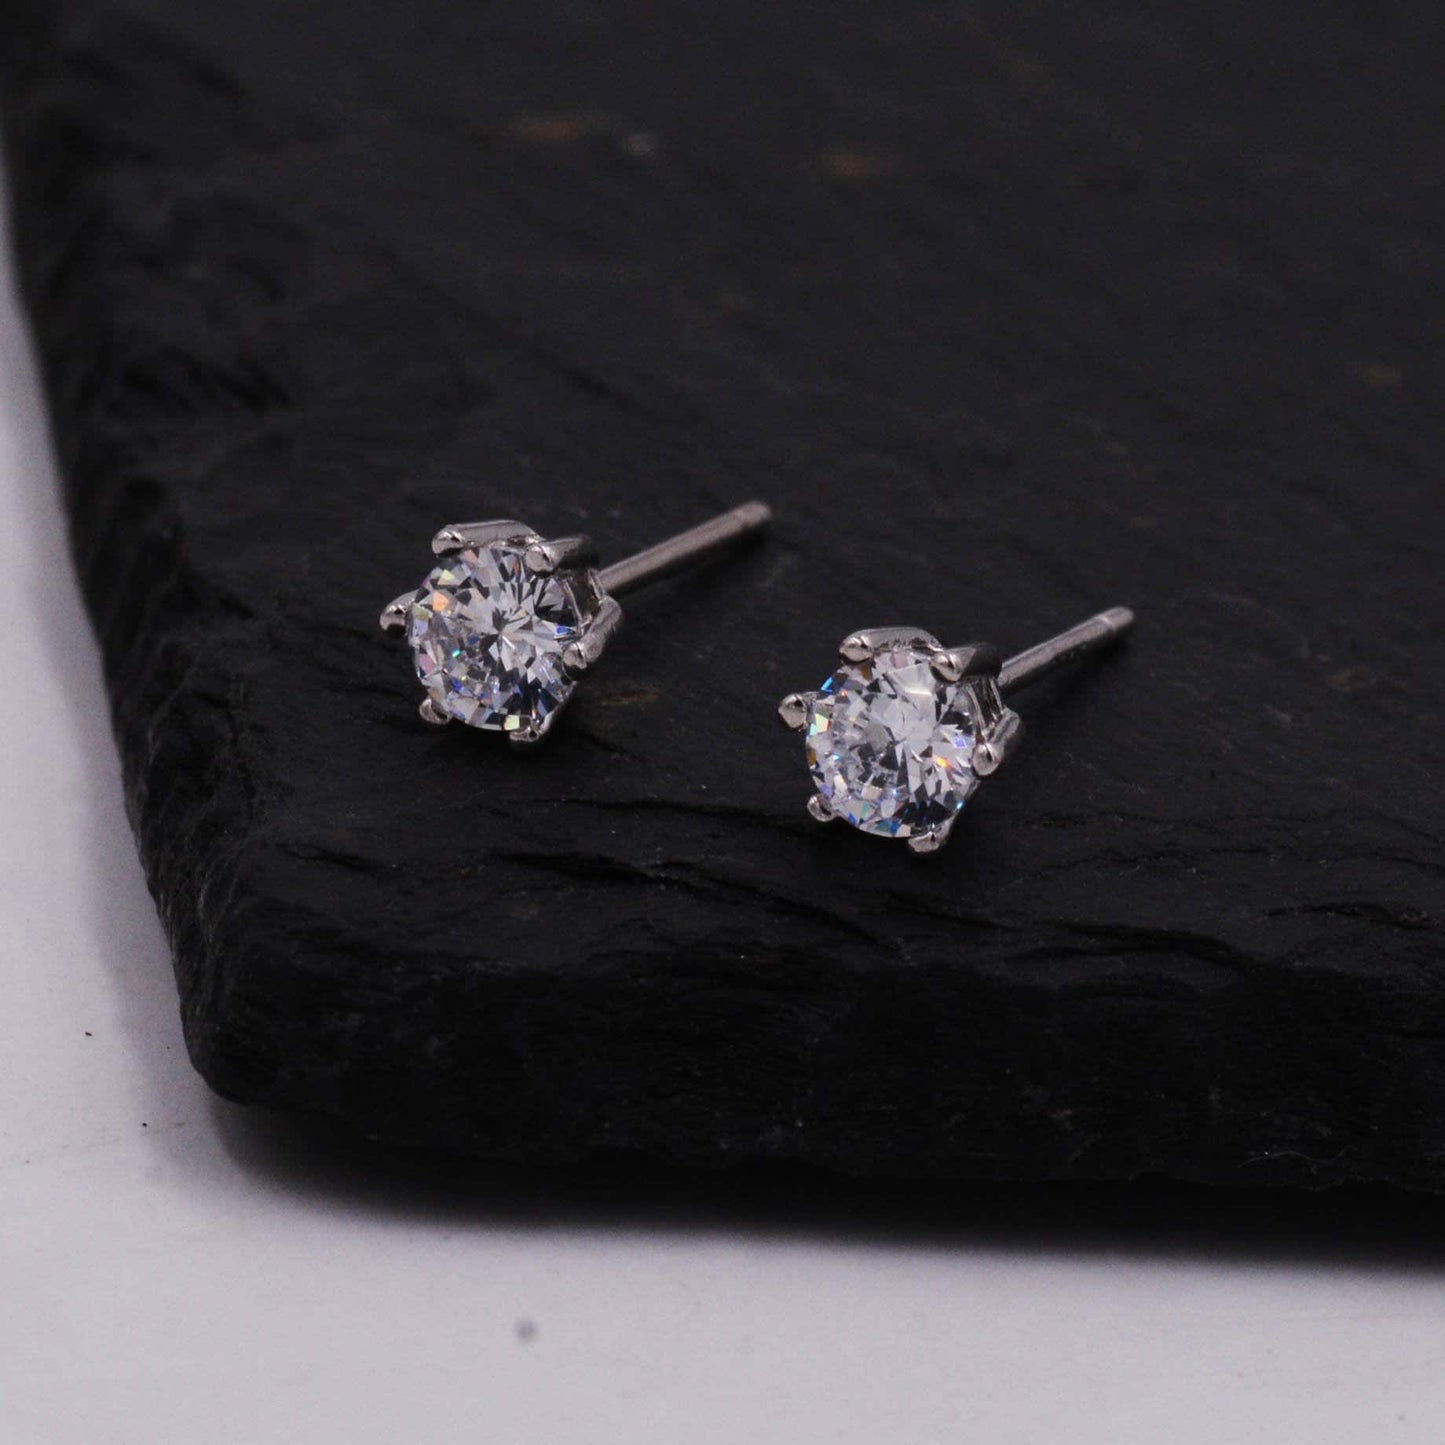 Sterling Silver Minimalist Solitaire CZ Crystal Dot Stud Earrings - Simulated Diamond -  3mm 4mm 5mm 6mm Six Prong Earrings